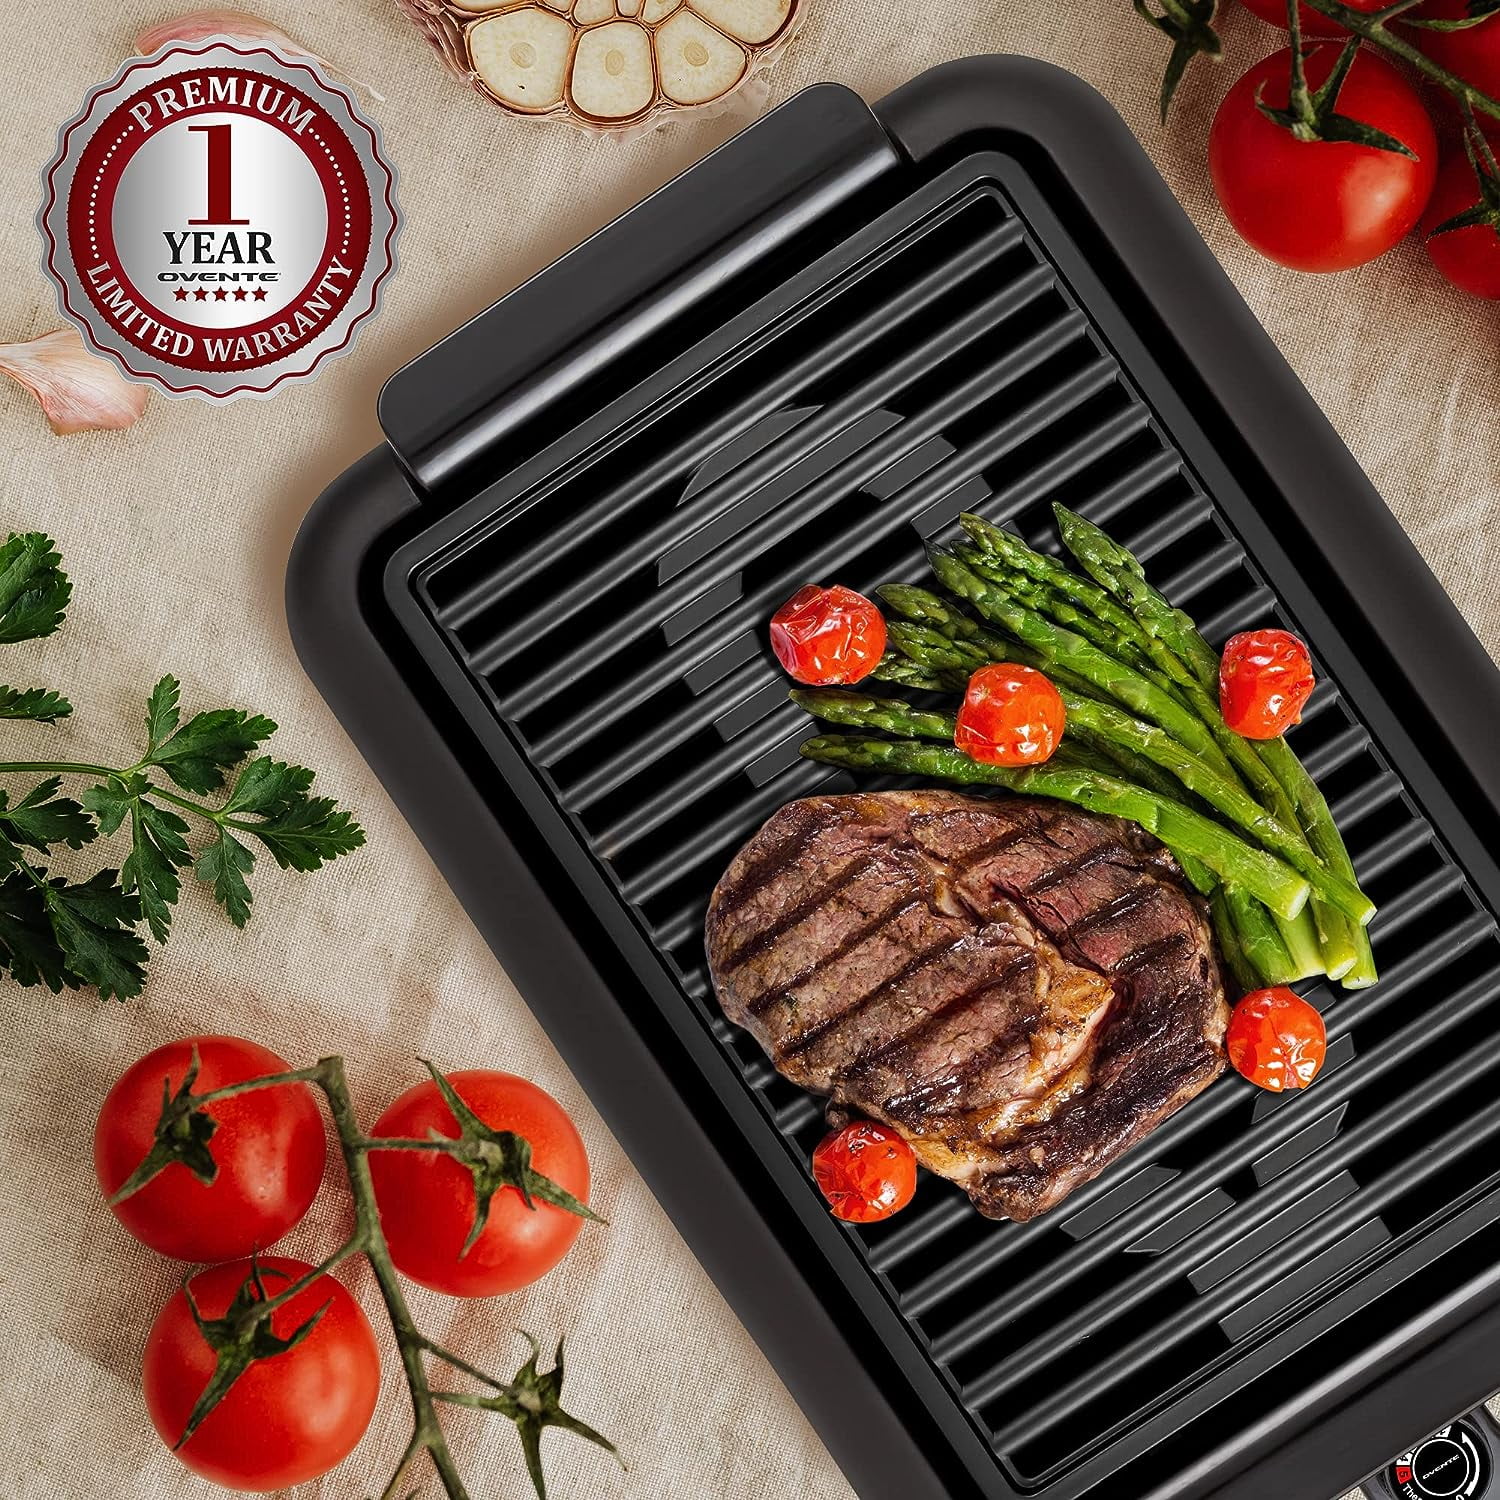 Ovente Electric Indoor Grill with Non-Stick Cooking Plate - Black